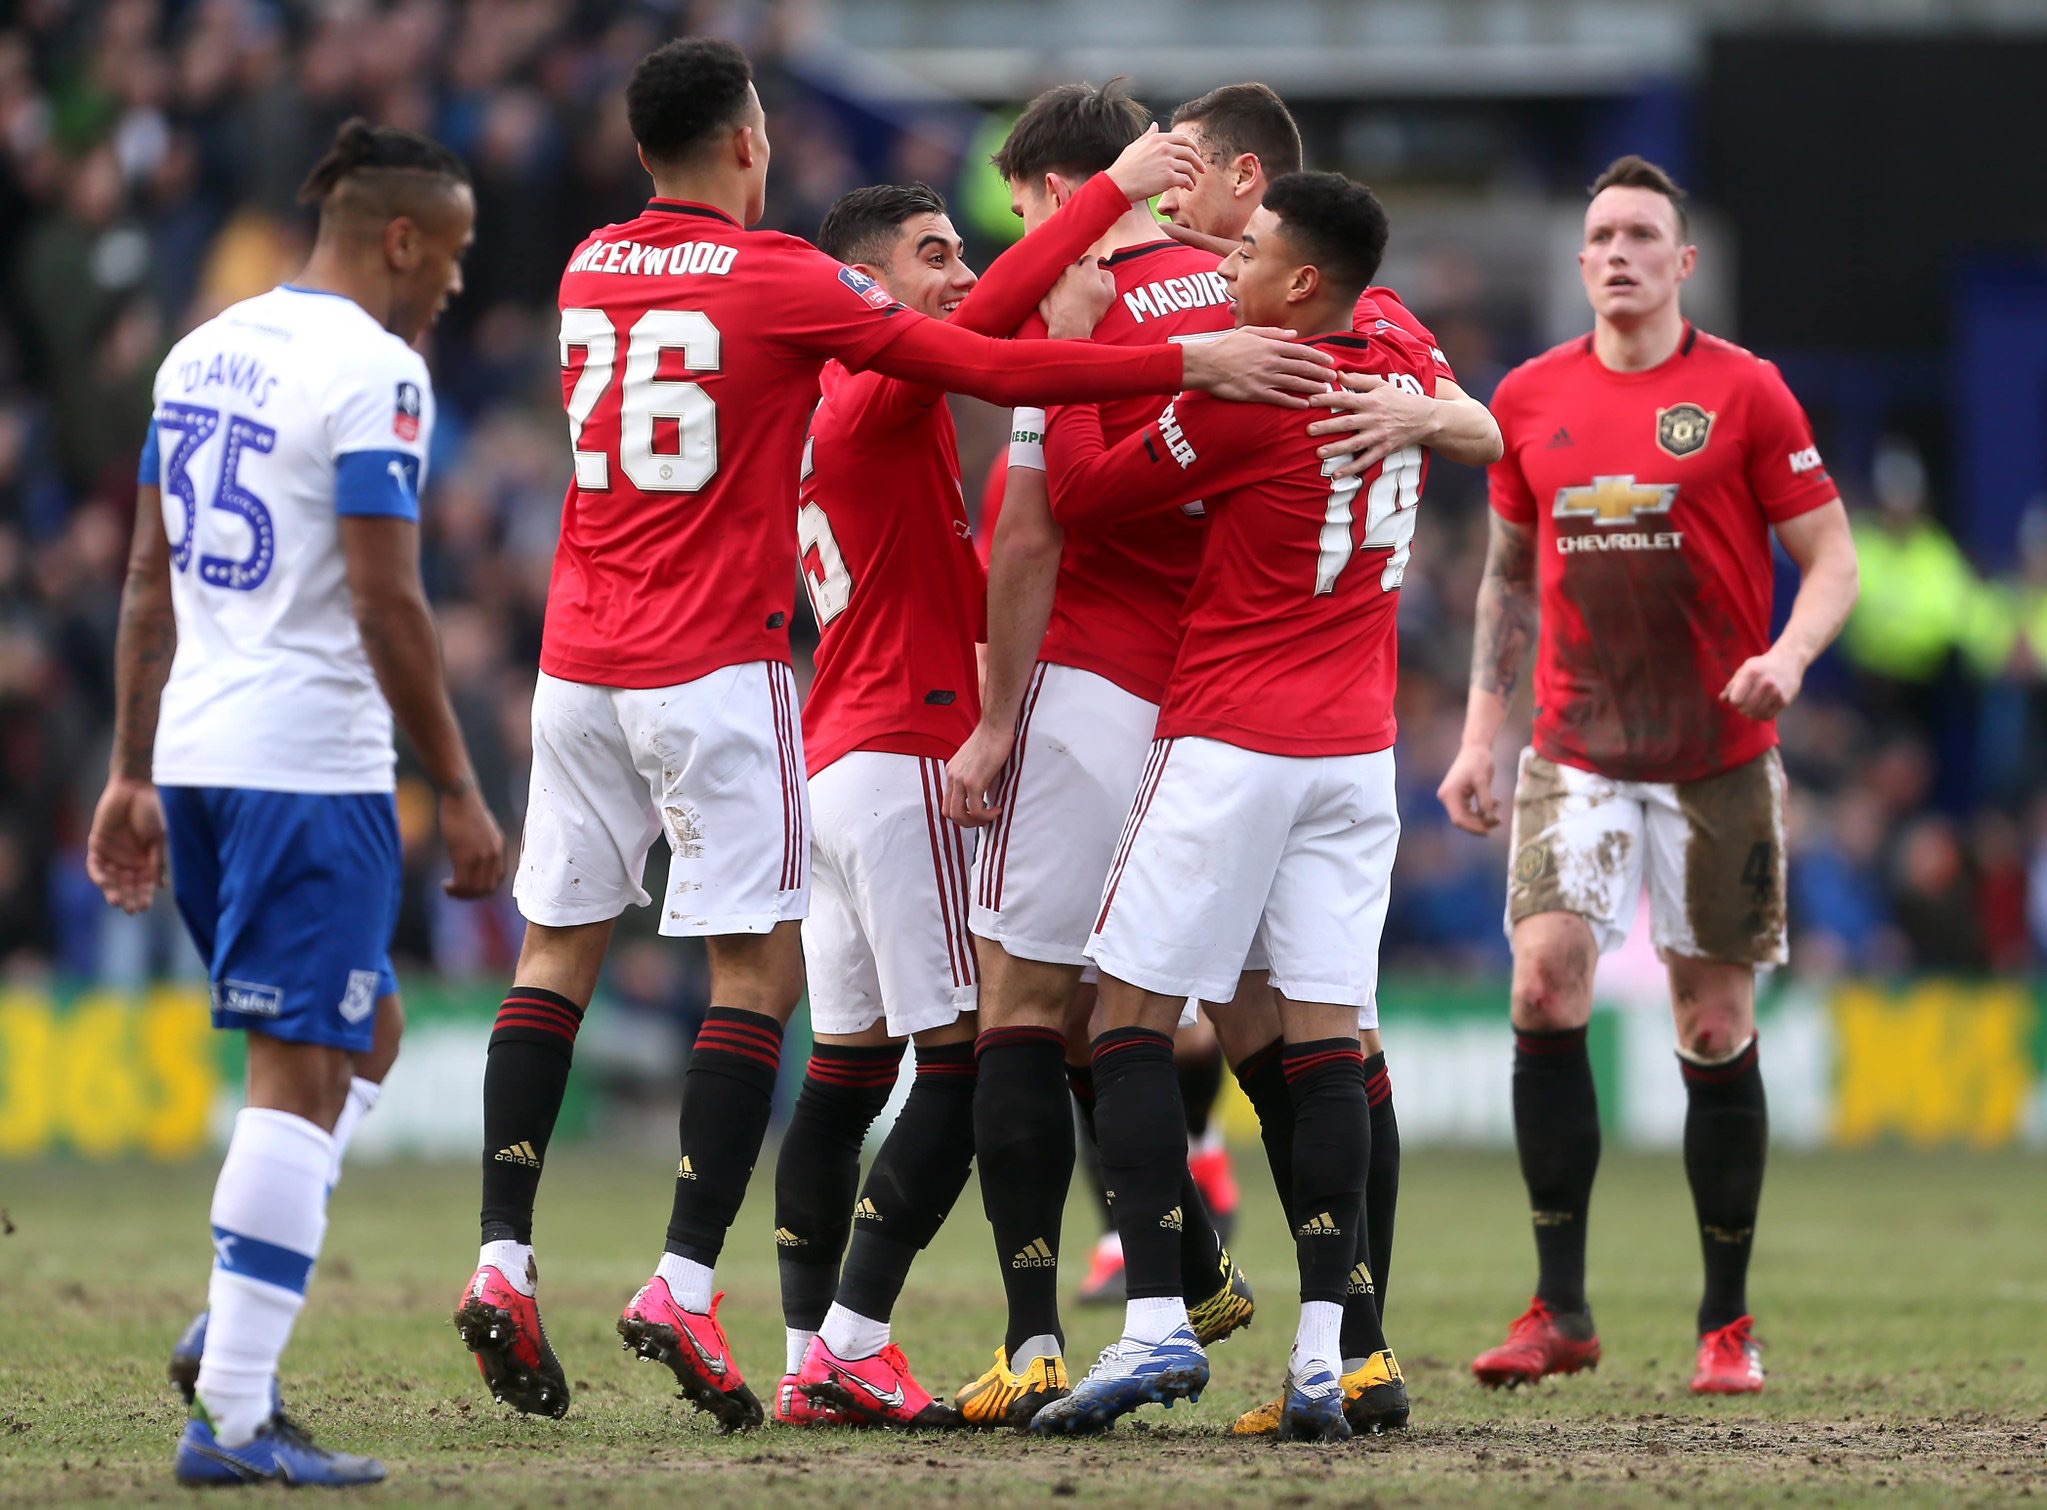 Tranmere Rovers 0 -6 Manchester United